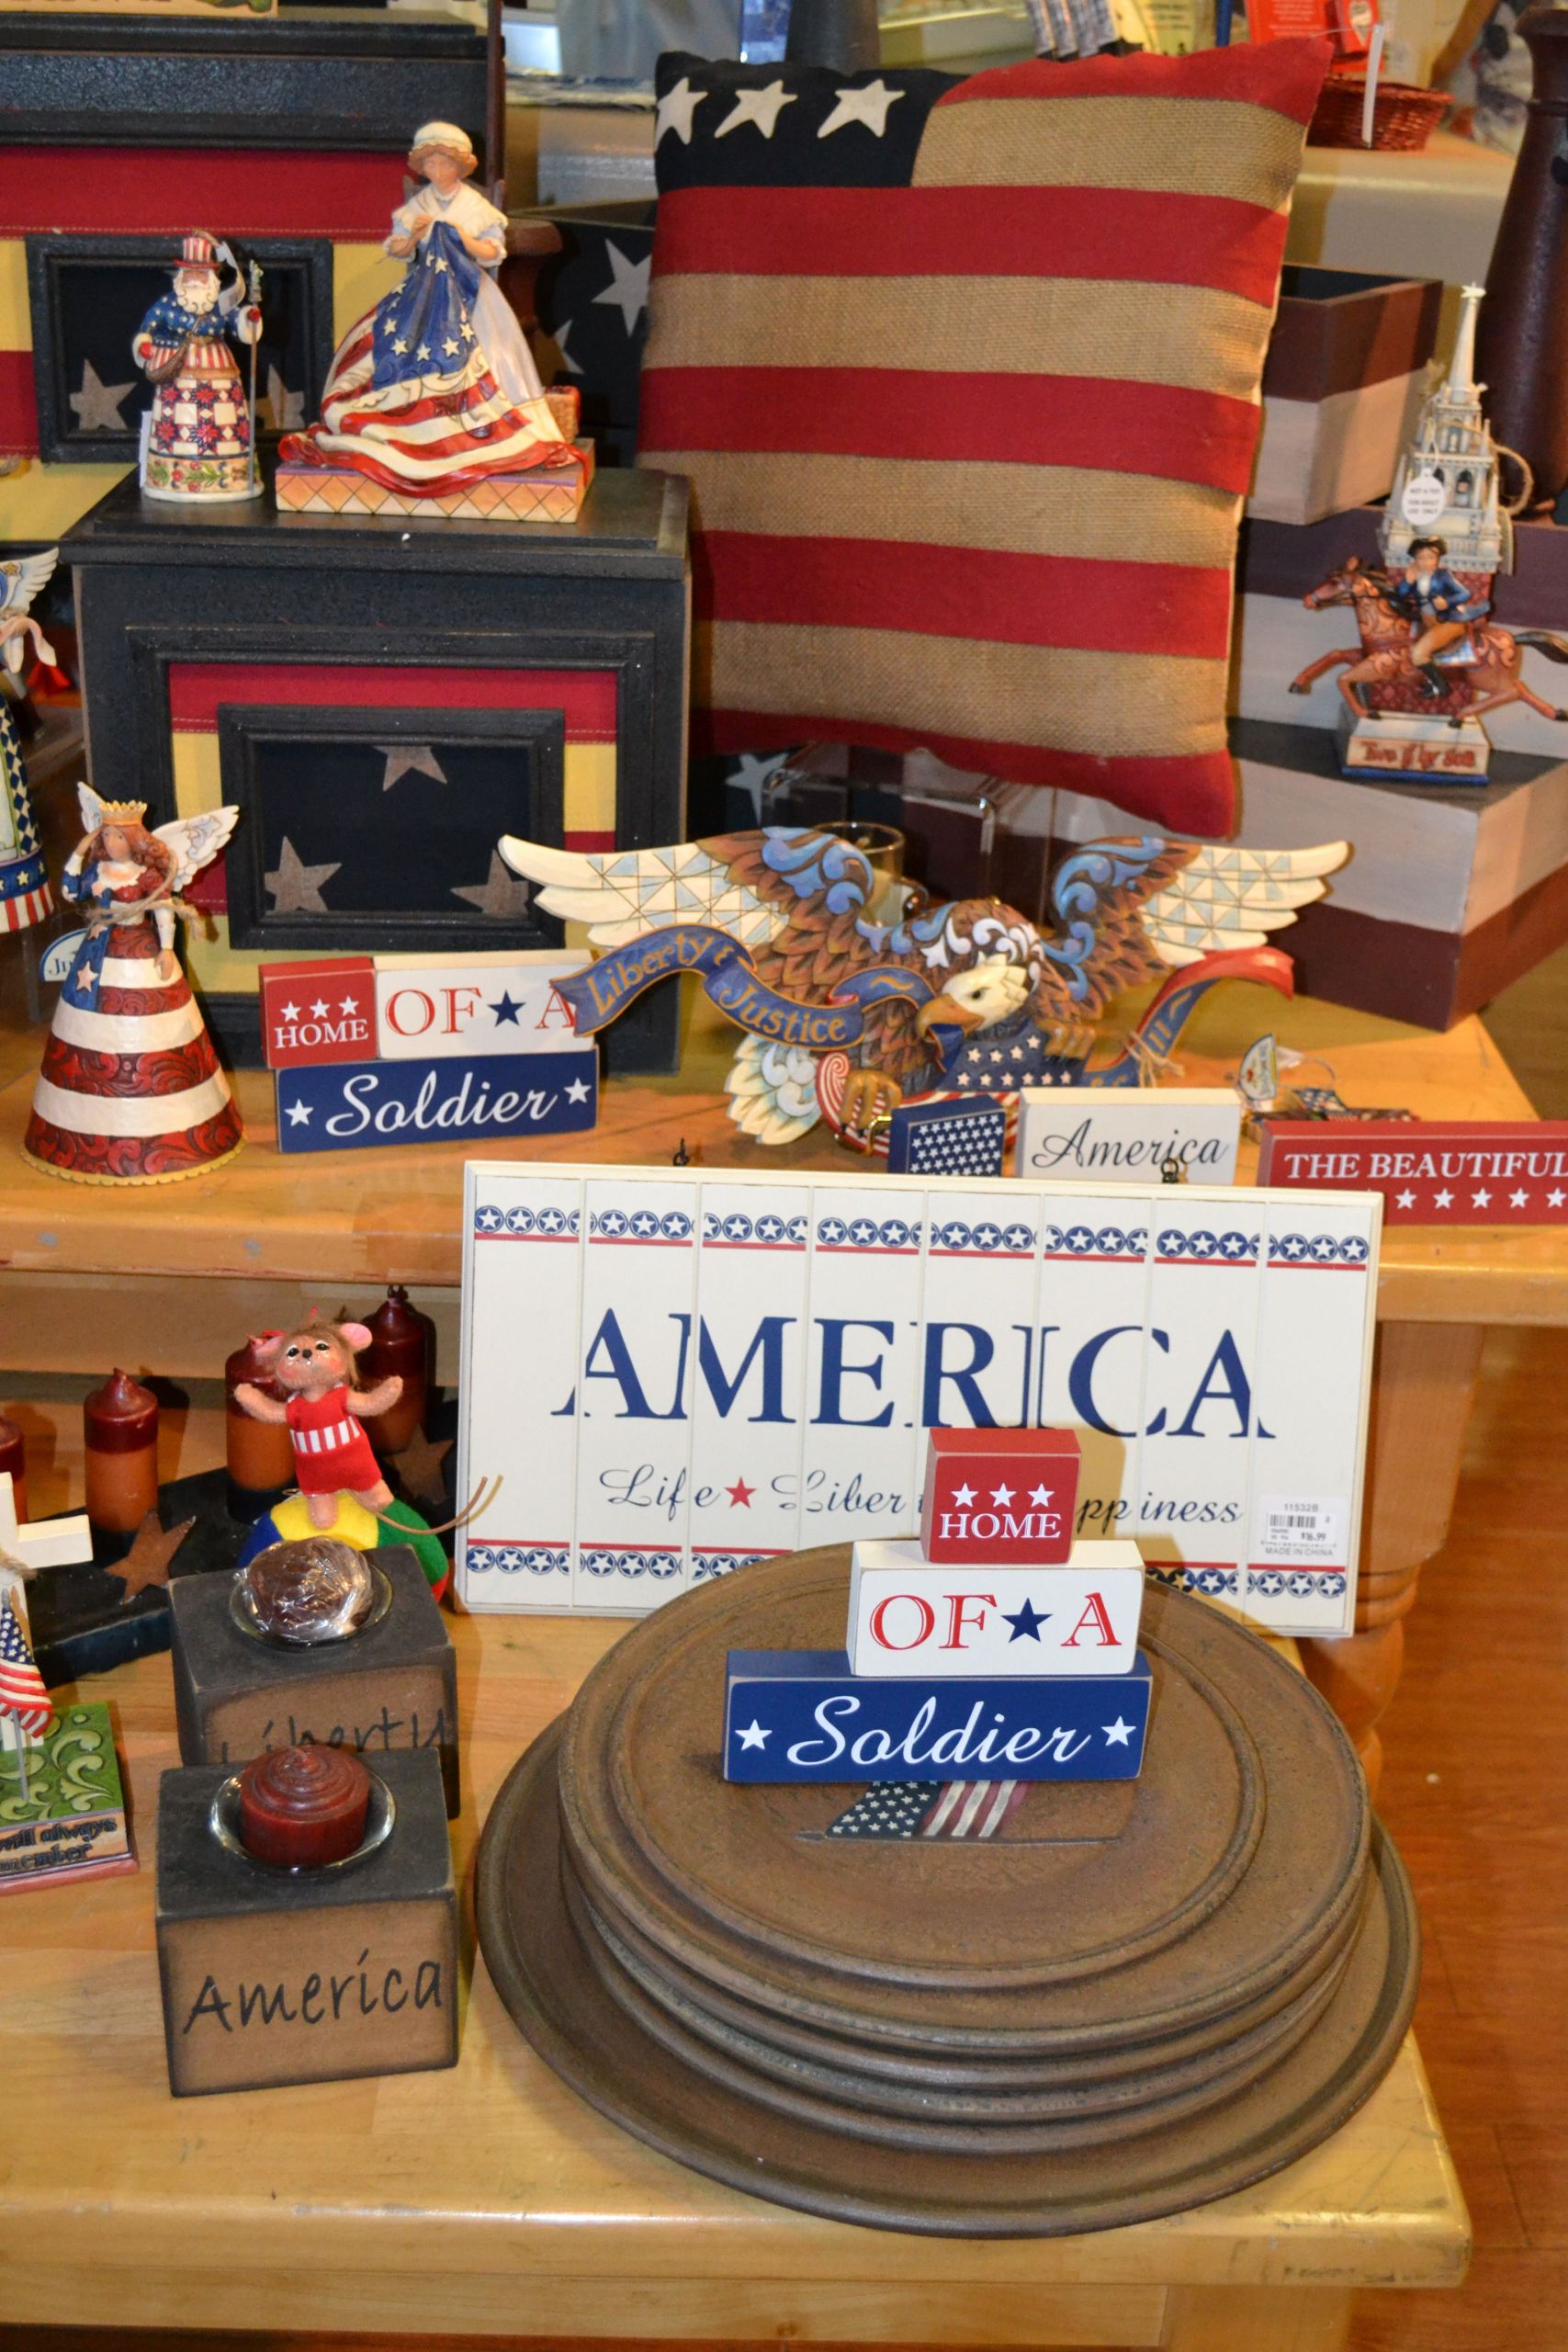 Military Graduation Gift Ideas
 Patriotic Military merchandise at MarketPlace